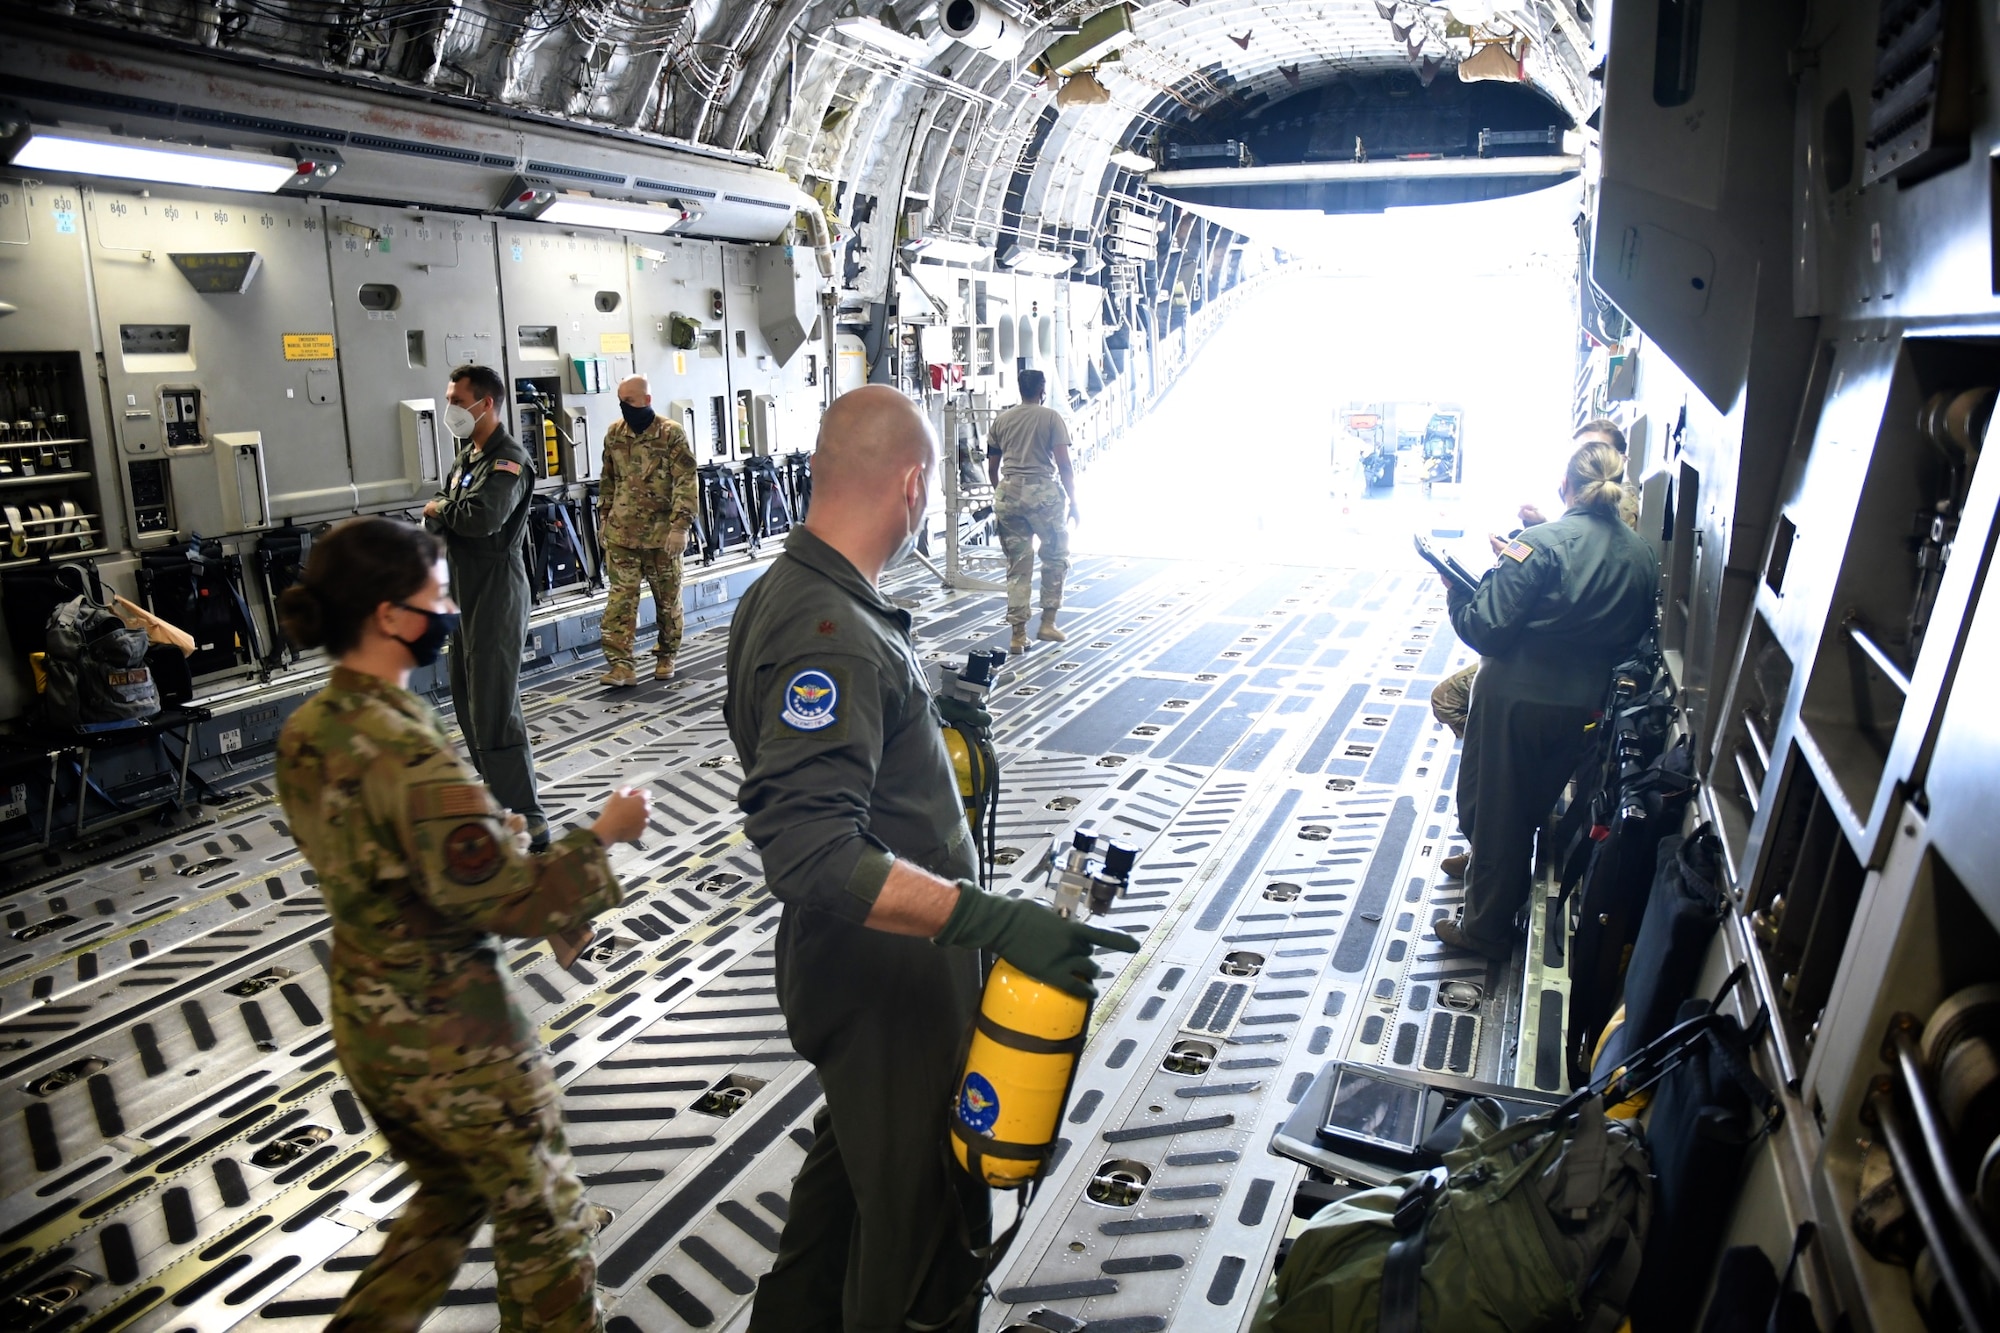 Despite the warm high 80's temperatures, a group of 932nd Aeromedical Evacuation Squadron (AES) members offload their medical gear from an equipment truck to a visiting C-17 aircraft September 27, 2020, Scott Air Force Base, Ill. The 932nd Airlift Wing worked improving and refining hands on skills at the unit which included members of the 131st Medical Group, Air National Guard, and 445th Airlift Wing, Air Force Reserve. Airmen worked together on first aid skills. Simulated patients were moved safely by litter from a waiting vehicle. The compact, highly-packed training was designed to improve skills and execute any future medical missions. (U.S. Air Force photo by Lt. Col. Stan Paregien)